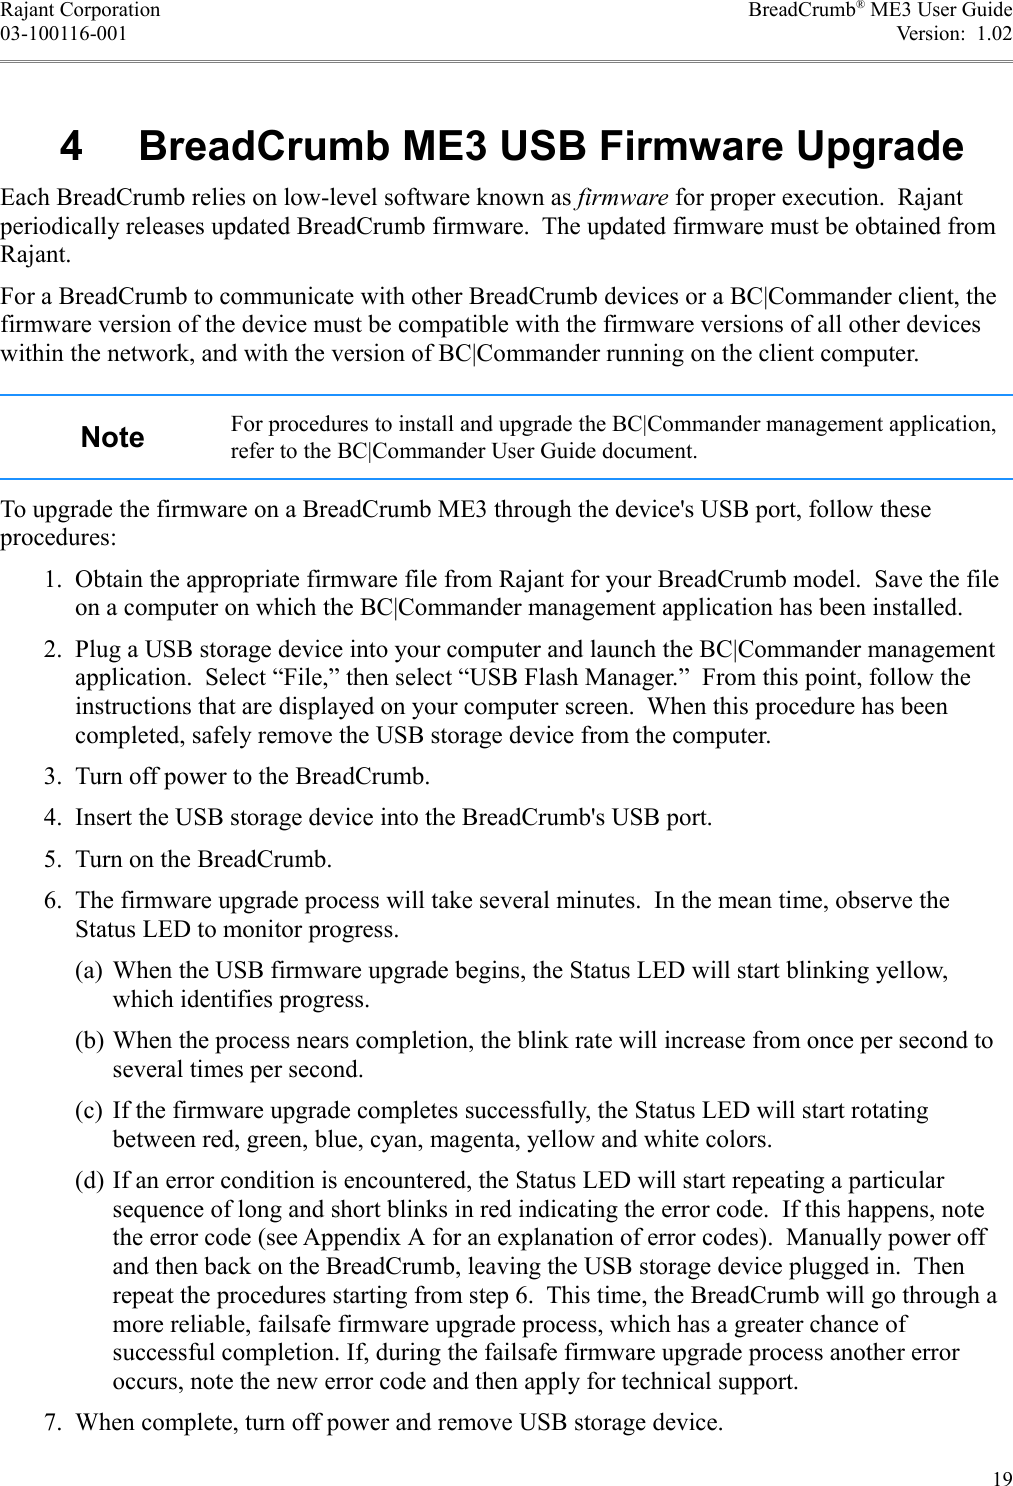 Rajant Corporation BreadCrumb® ME3 User Guide03-100116-001 Version:  1.02 4  BreadCrumb ME3 USB Firmware UpgradeEach BreadCrumb relies on low-level software known as firmware for proper execution.  Rajant periodically releases updated BreadCrumb firmware.  The updated firmware must be obtained from Rajant.For a BreadCrumb to communicate with other BreadCrumb devices or a BC|Commander client, the firmware version of the device must be compatible with the firmware versions of all other devices within the network, and with the version of BC|Commander running on the client computer.Note For procedures to install and upgrade the BC|Commander management application, refer to the BC|Commander User Guide document.To upgrade the firmware on a BreadCrumb ME3 through the device&apos;s USB port, follow these procedures: 1. Obtain the appropriate firmware file from Rajant for your BreadCrumb model.  Save the file on a computer on which the BC|Commander management application has been installed. 2. Plug a USB storage device into your computer and launch the BC|Commander management application.  Select “File,” then select “USB Flash Manager.”  From this point, follow the instructions that are displayed on your computer screen.  When this procedure has been completed, safely remove the USB storage device from the computer. 3. Turn off power to the BreadCrumb. 4. Insert the USB storage device into the BreadCrumb&apos;s USB port. 5. Turn on the BreadCrumb. 6. The firmware upgrade process will take several minutes.  In the mean time, observe the Status LED to monitor progress.(a) When the USB firmware upgrade begins, the Status LED will start blinking yellow, which identifies progress.(b) When the process nears completion, the blink rate will increase from once per second to several times per second.(c) If the firmware upgrade completes successfully, the Status LED will start rotating between red, green, blue, cyan, magenta, yellow and white colors.(d) If an error condition is encountered, the Status LED will start repeating a particular sequence of long and short blinks in red indicating the error code.  If this happens, note the error code (see Appendix A for an explanation of error codes).  Manually power off and then back on the BreadCrumb, leaving the USB storage device plugged in.  Then repeat the procedures starting from step 6.  This time, the BreadCrumb will go through a more reliable, failsafe firmware upgrade process, which has a greater chance of successful completion. If, during the failsafe firmware upgrade process another error occurs, note the new error code and then apply for technical support. 7. When complete, turn off power and remove USB storage device.19